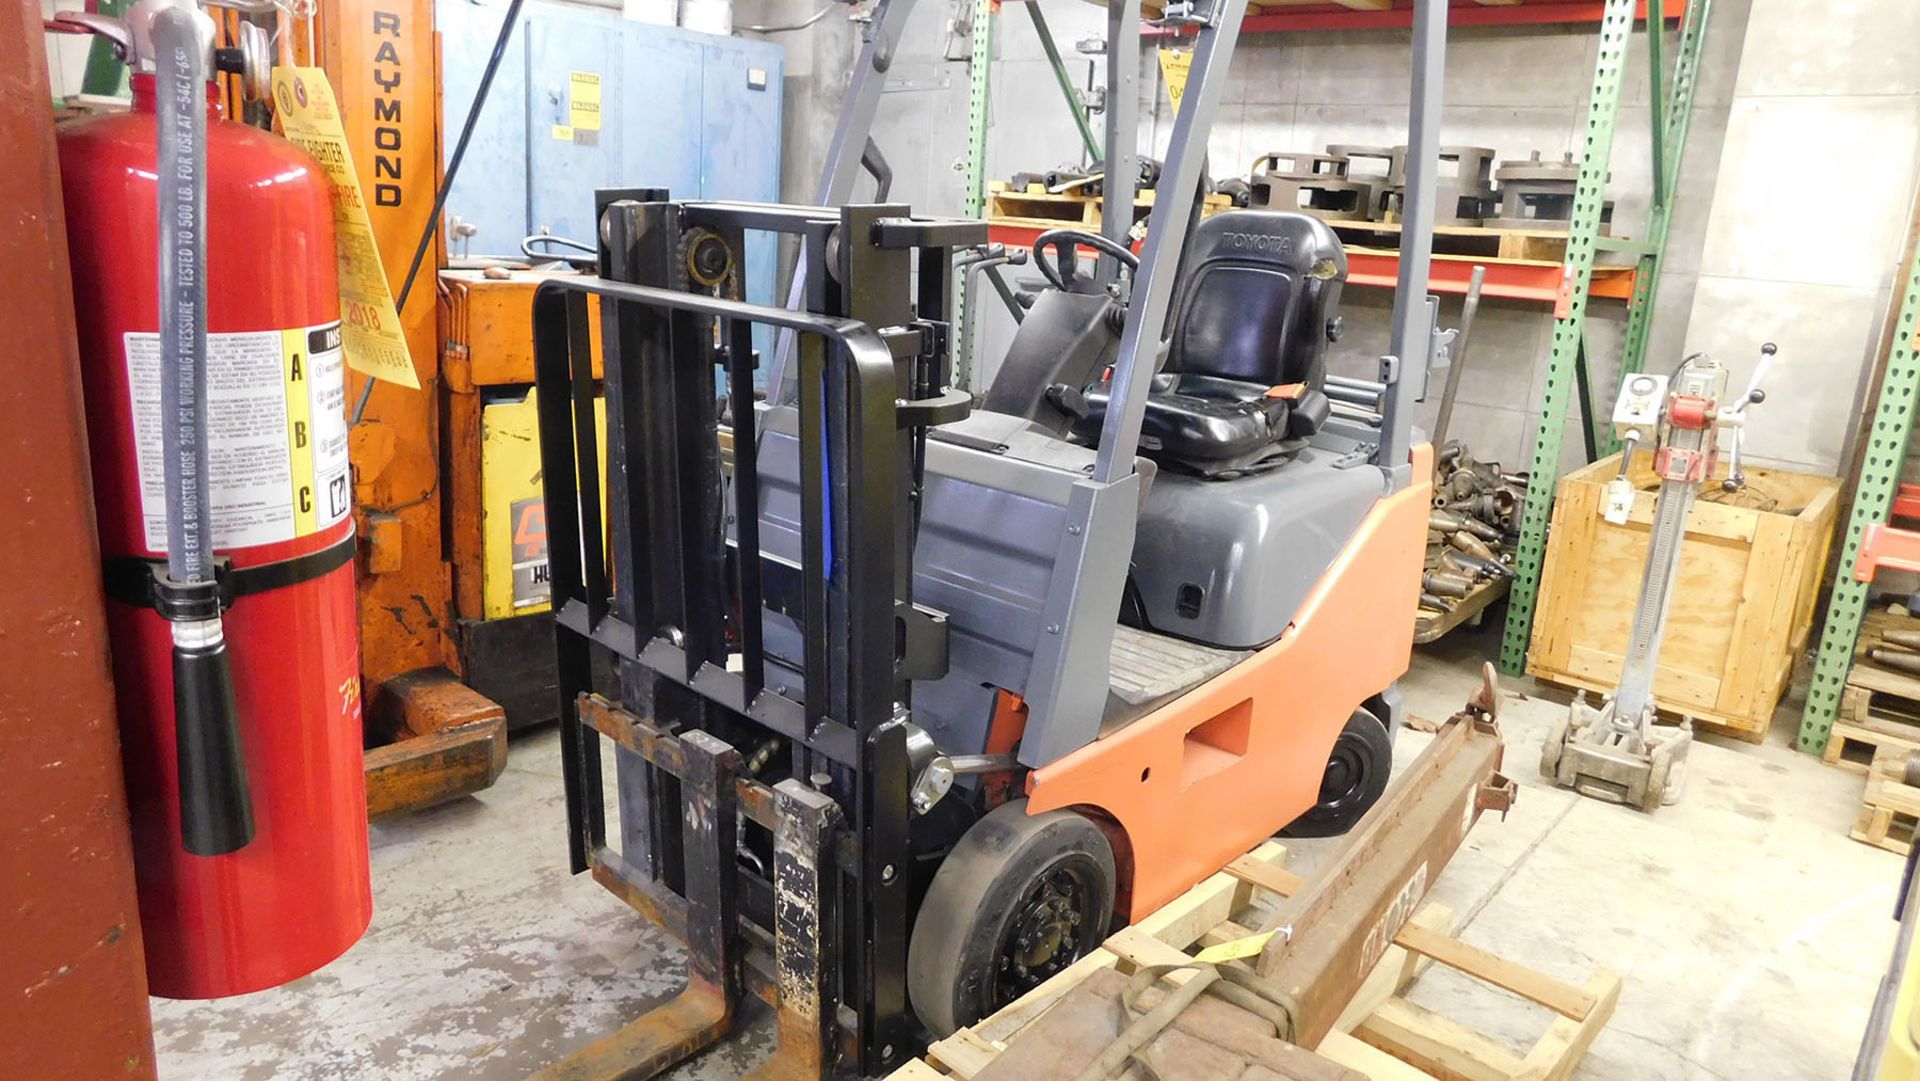 TOYOTA 3,000 LB. CAPACITY LPG FORKLIFT; S/N 21306, 80'' LIFT HEIGHT, 6,427 HOURS, SOLID CUSHION - Image 7 of 7